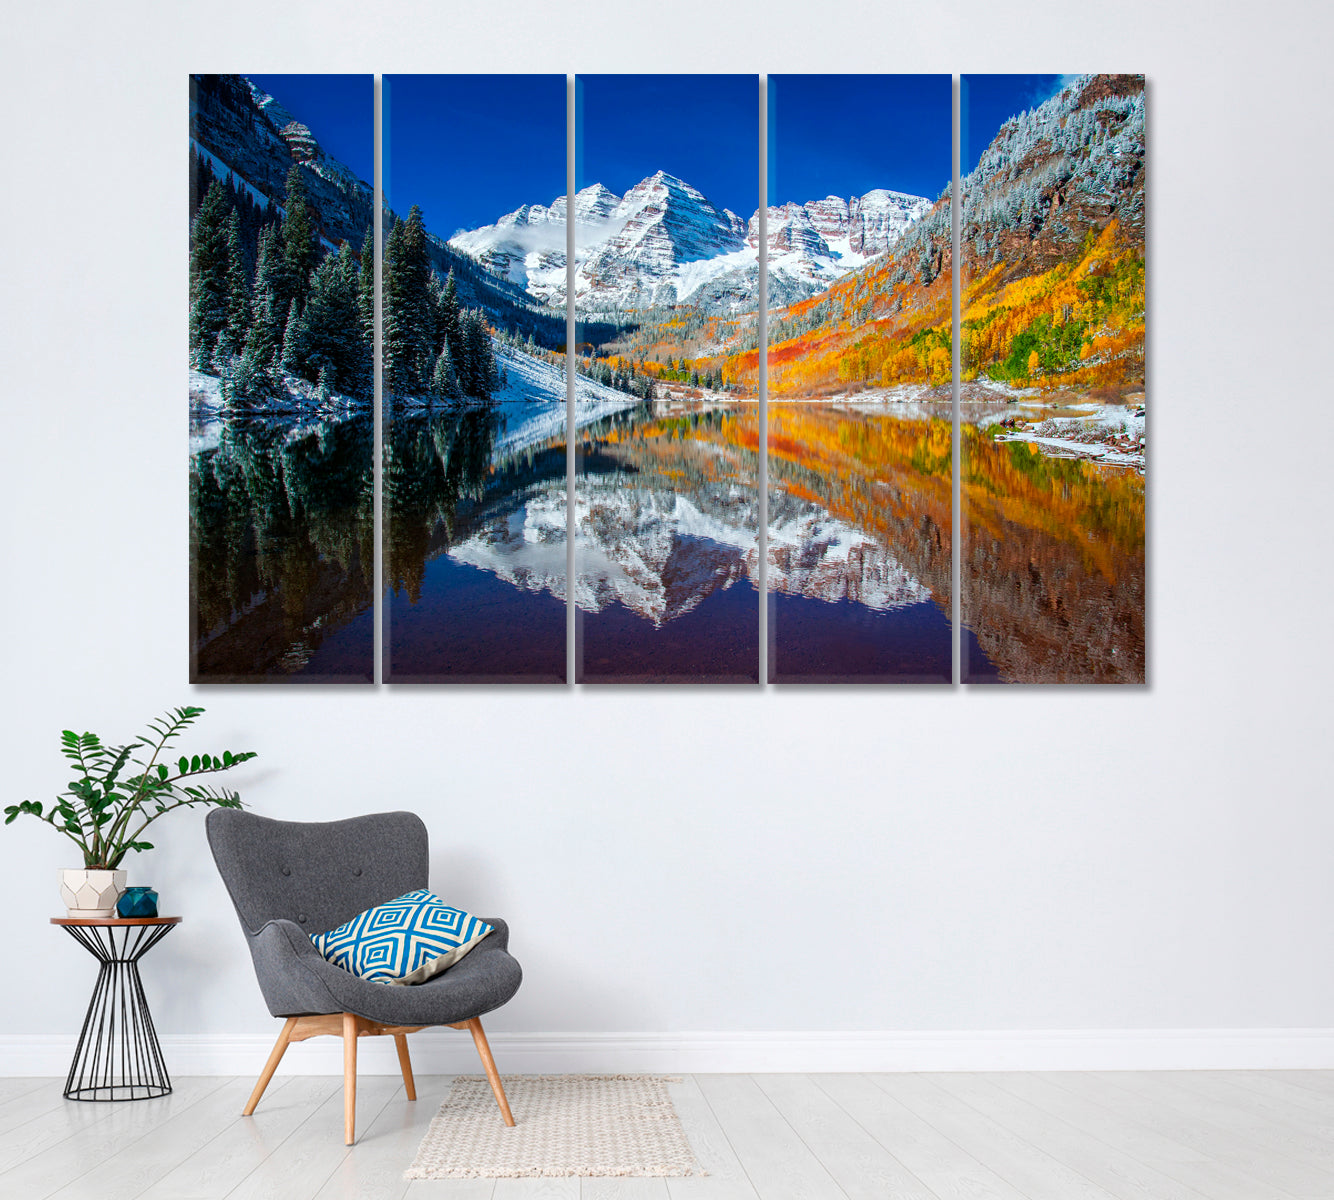 Maroon Lake and Maroon Bells Mountains Colorado Canvas Print ArtLexy 5 Panels 36"x24" inches 